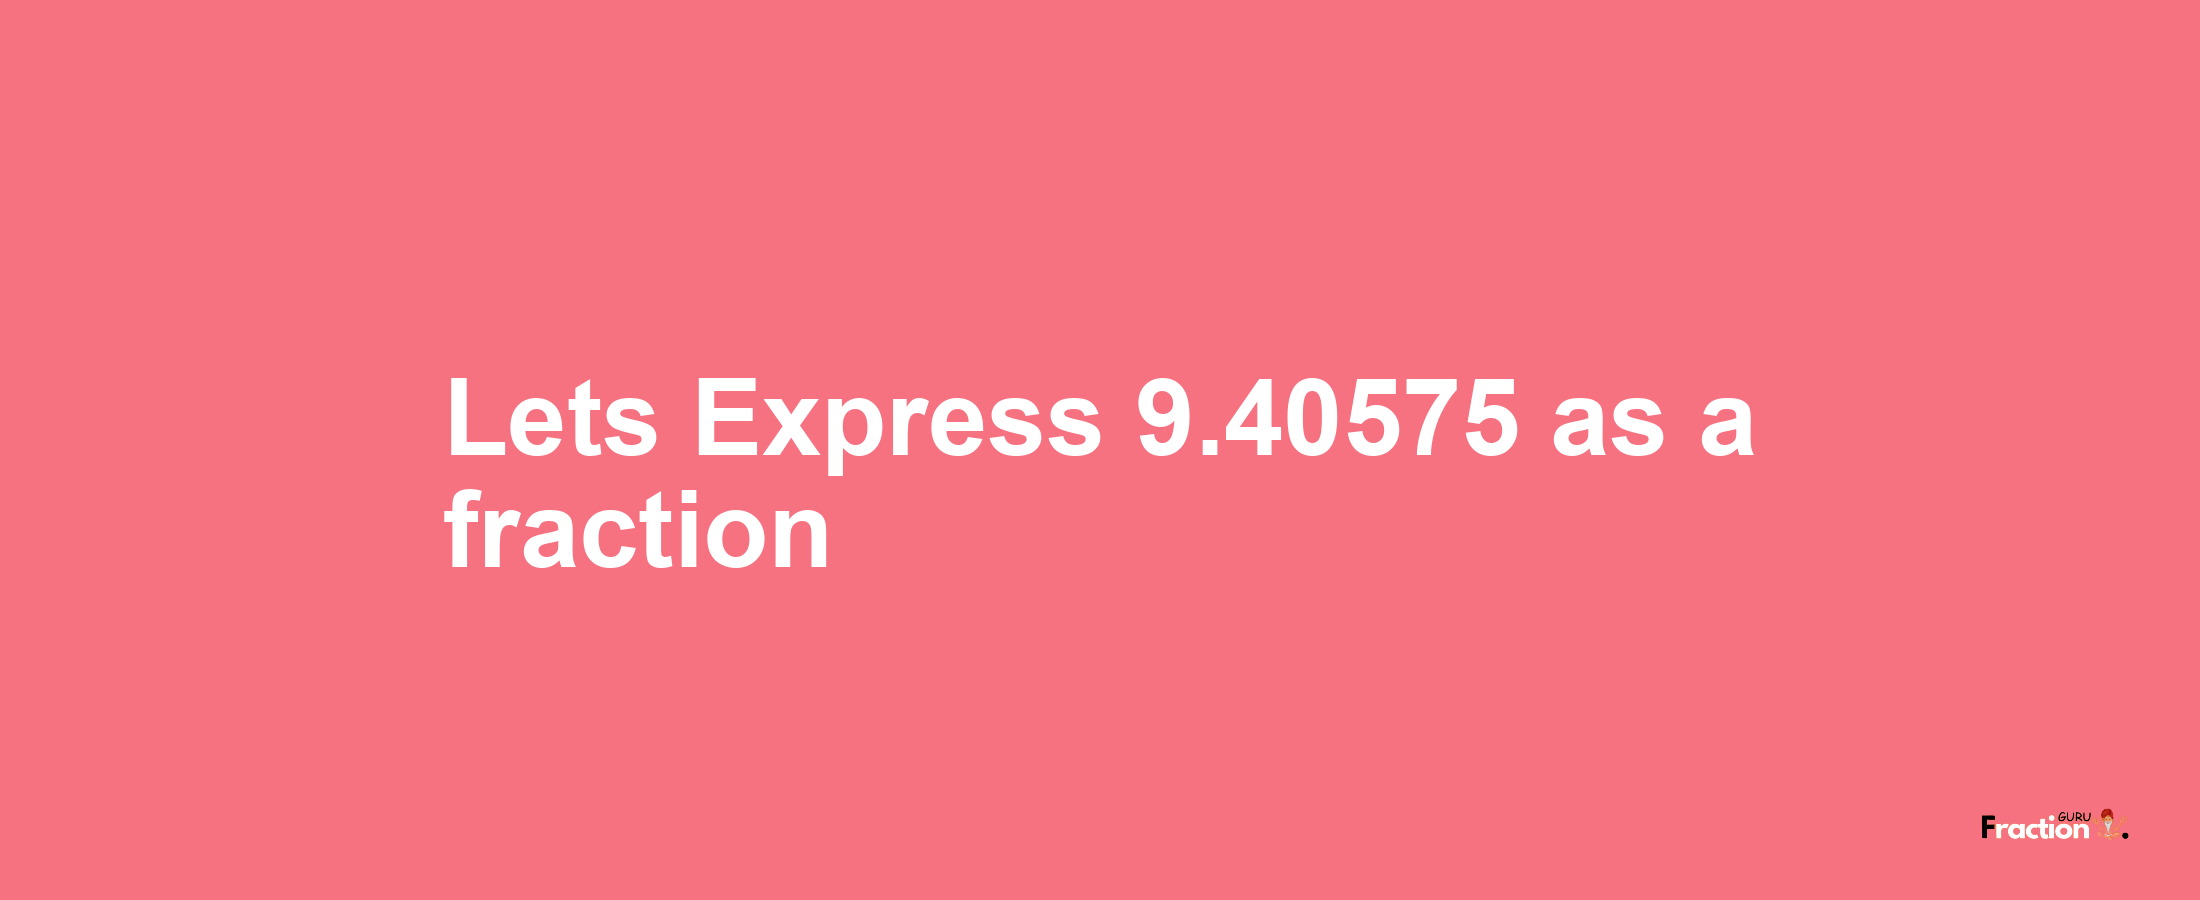 Lets Express 9.40575 as afraction